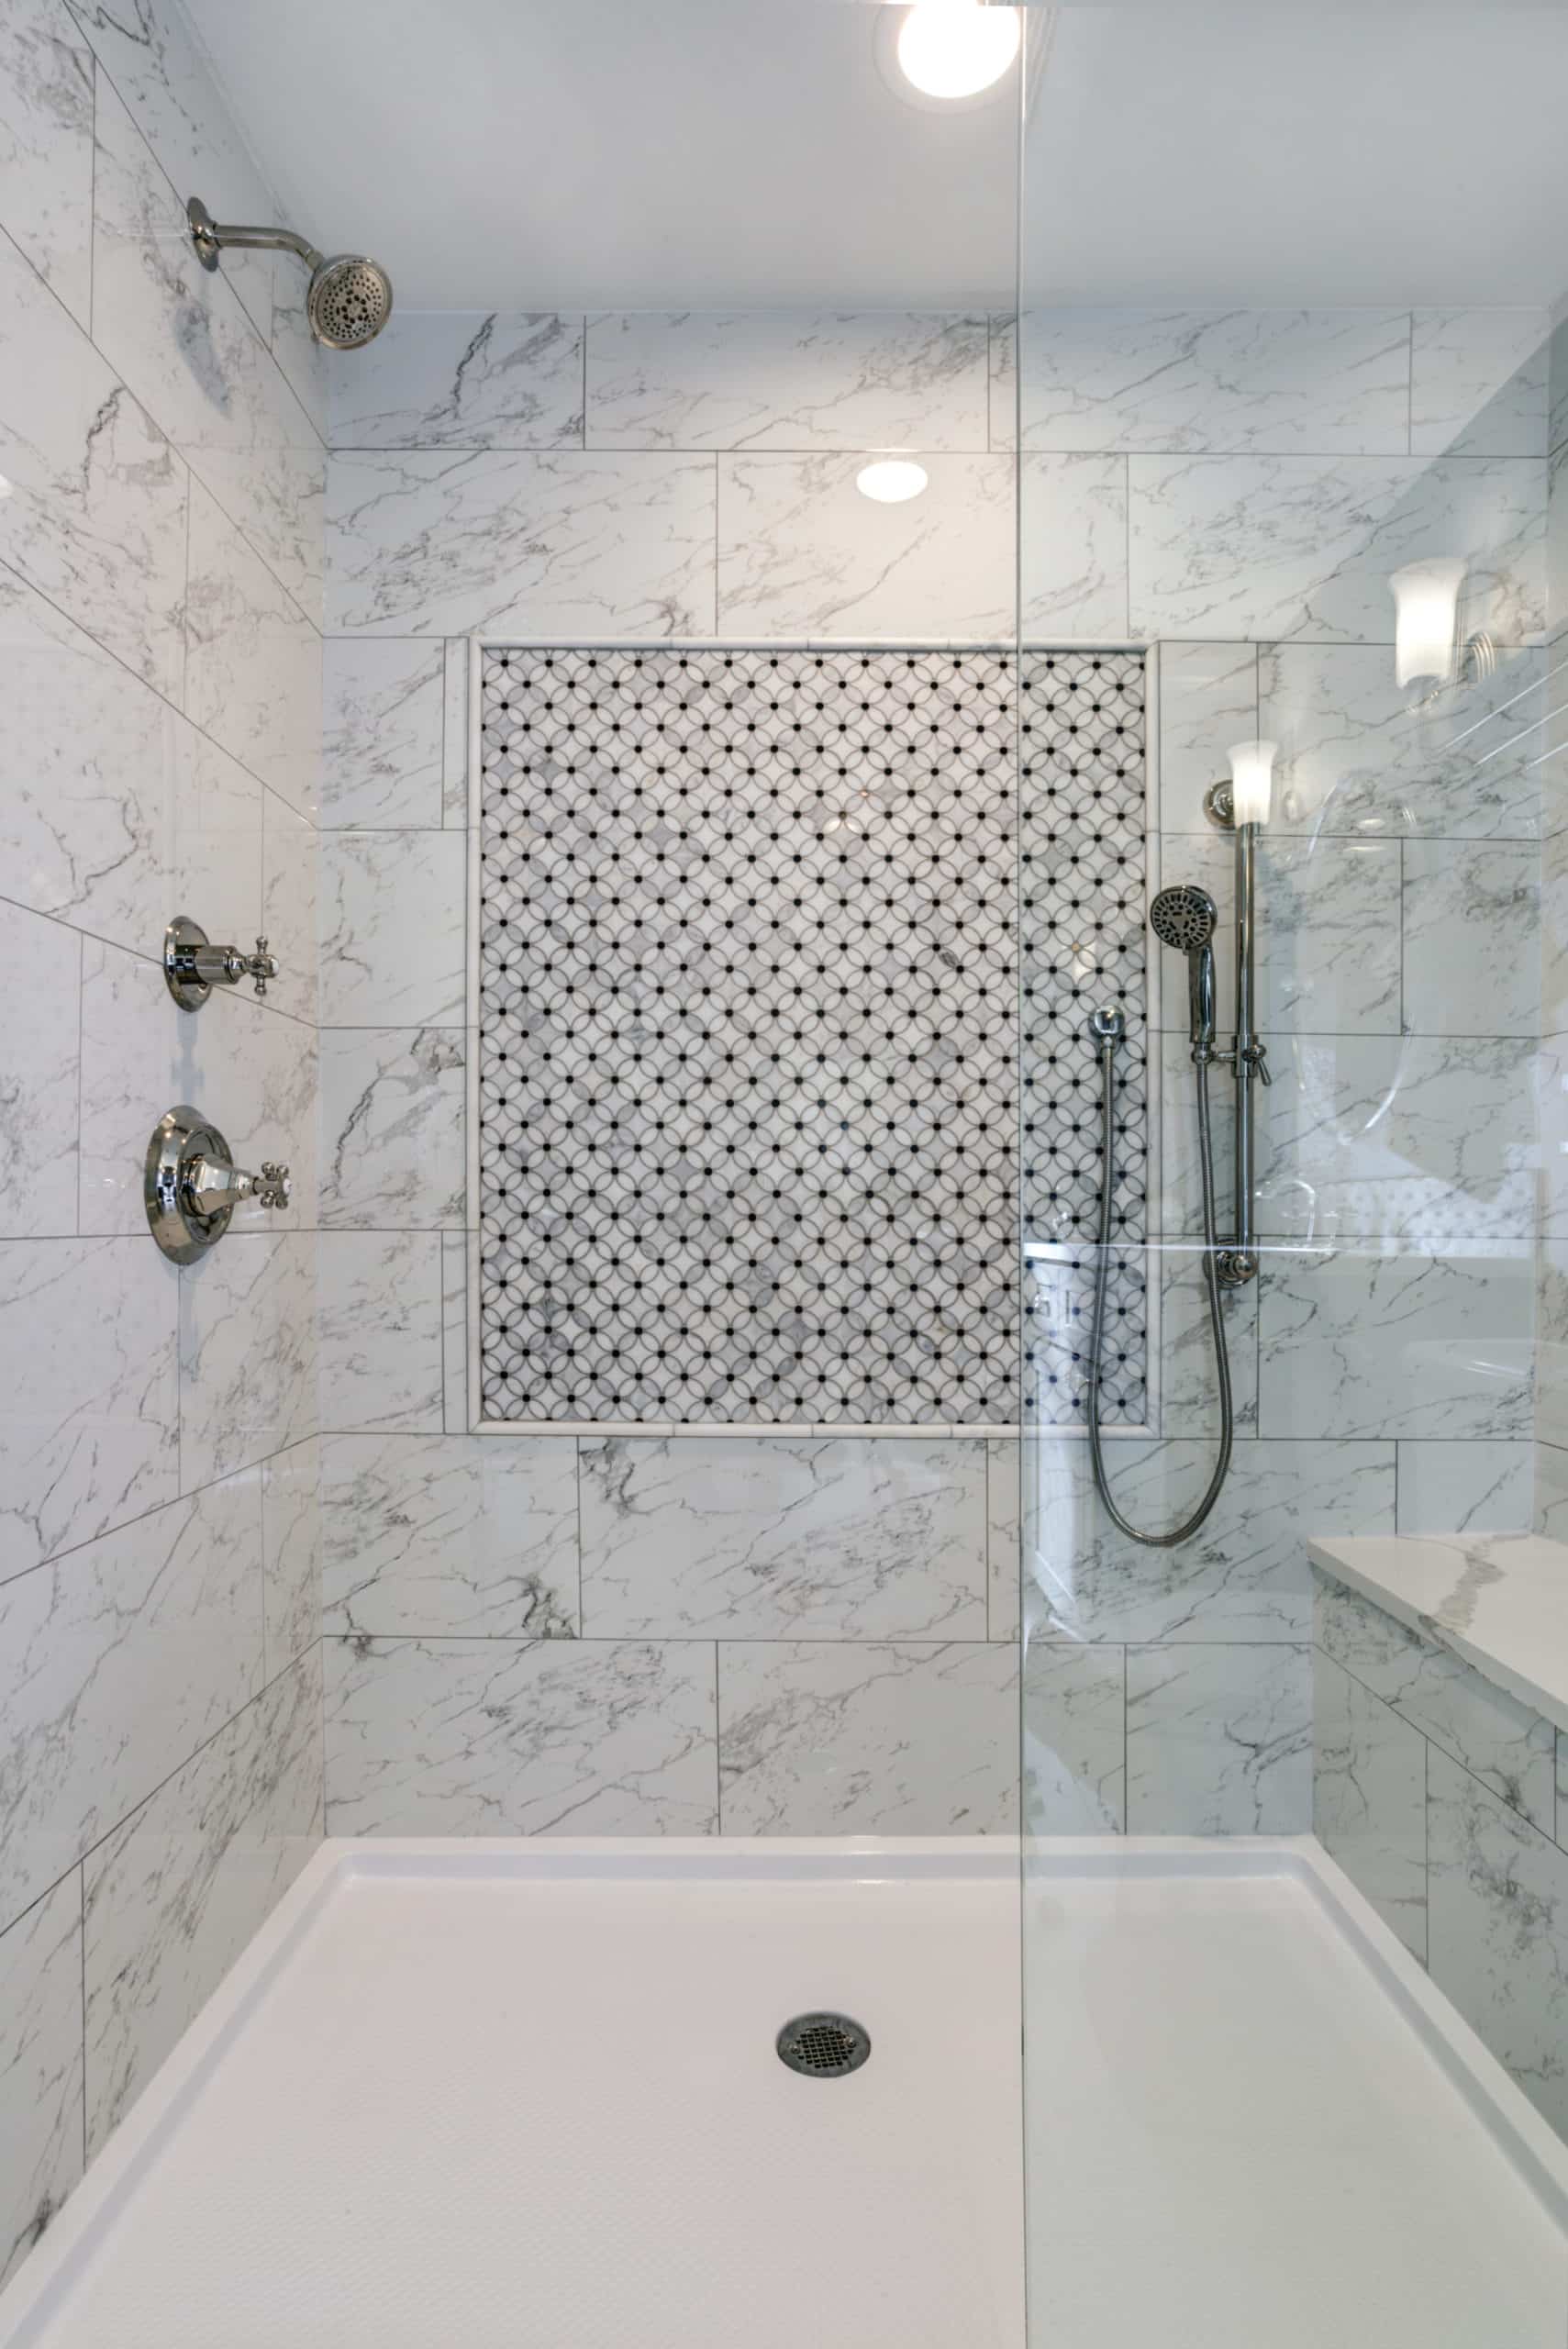 A walk-in shower with a marble shower and glass shower door.